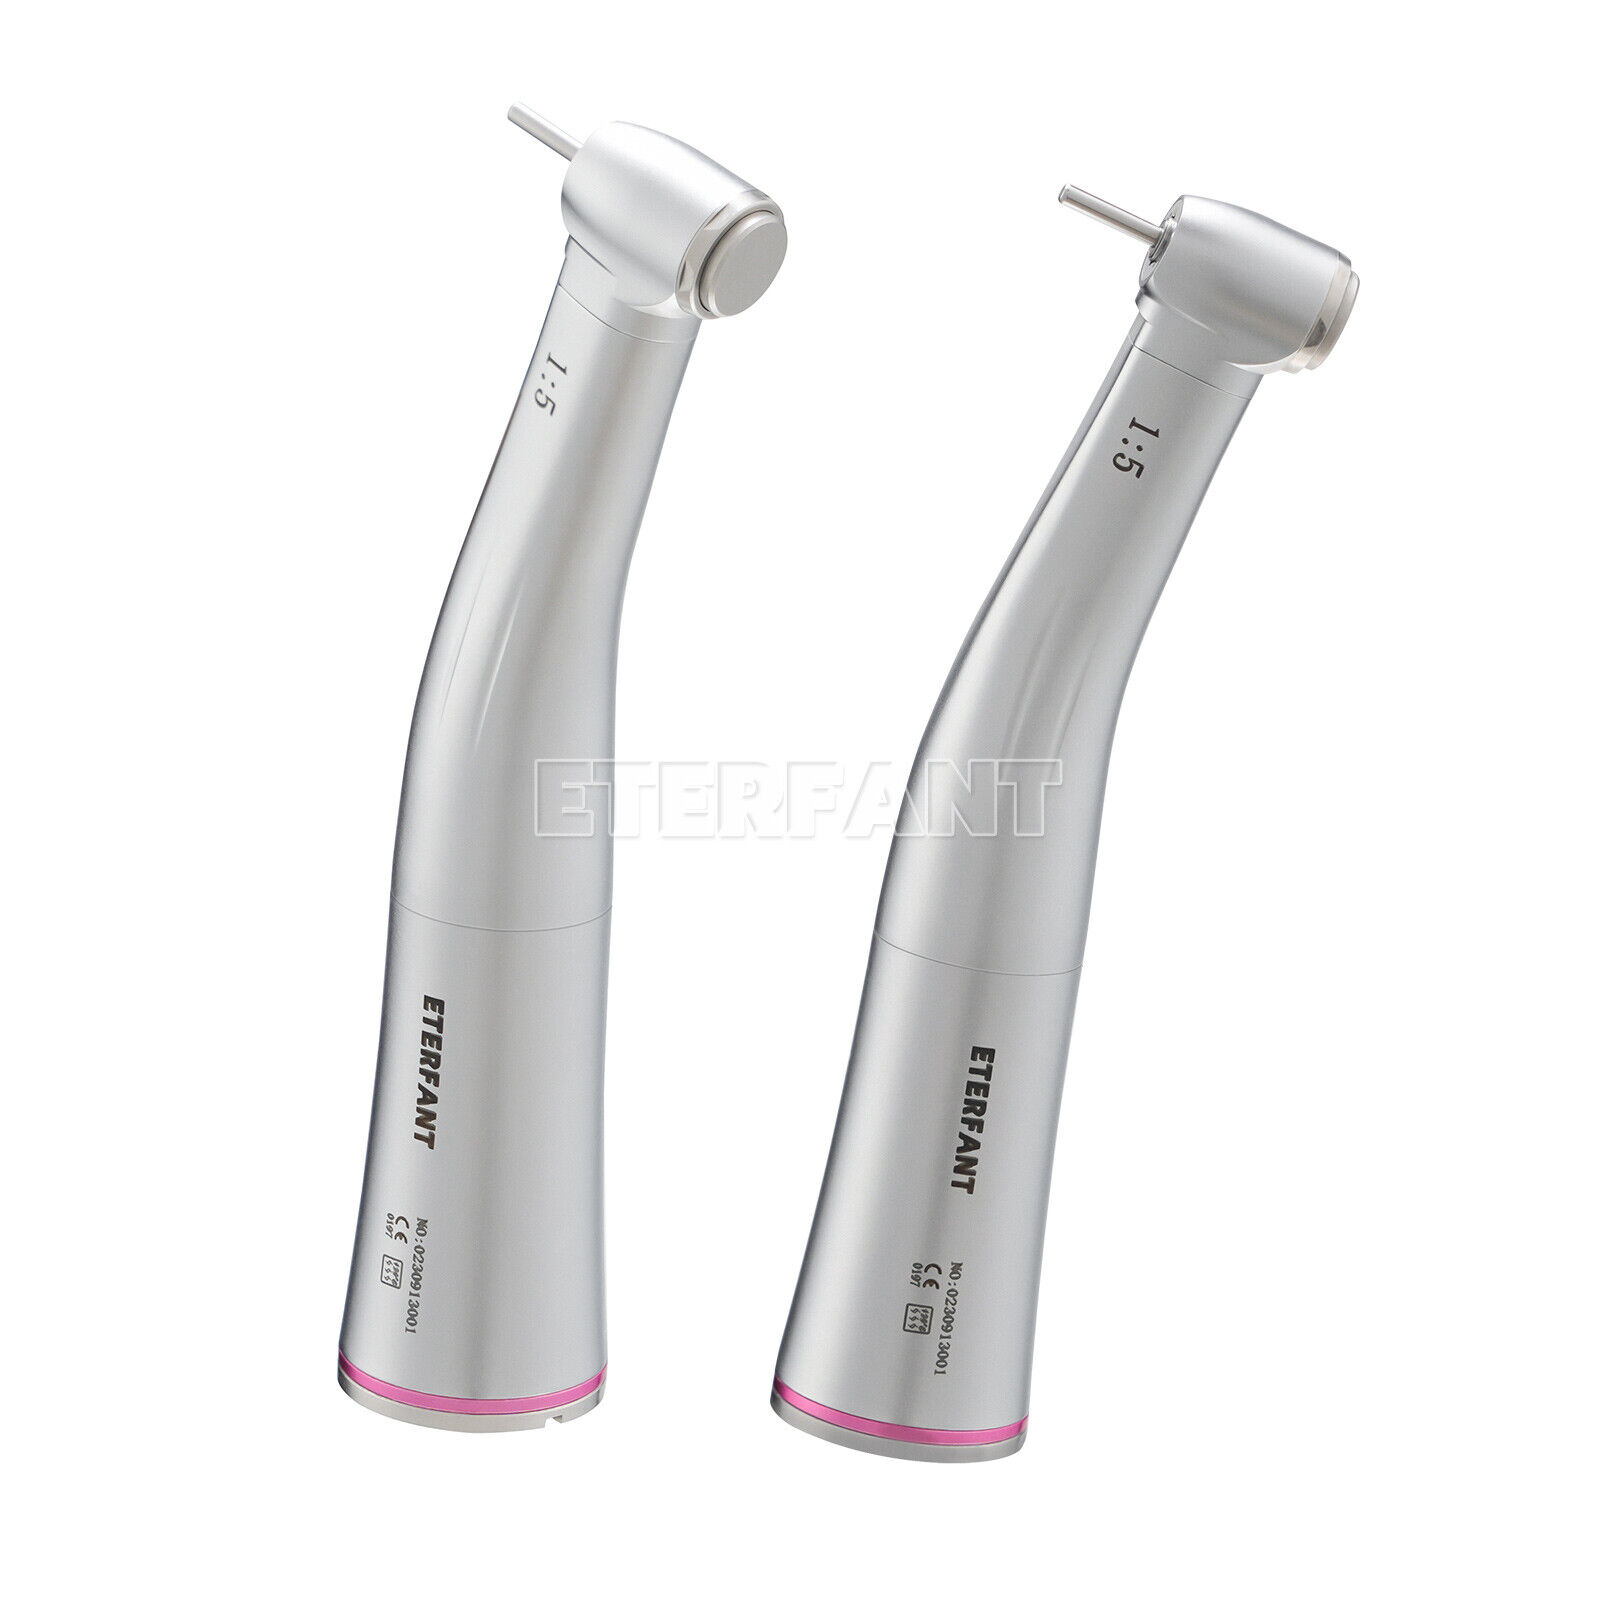 2xETERFANT Dental 1:5 Increasing Contra Angle Handpiece Fit NSK Electric Motor